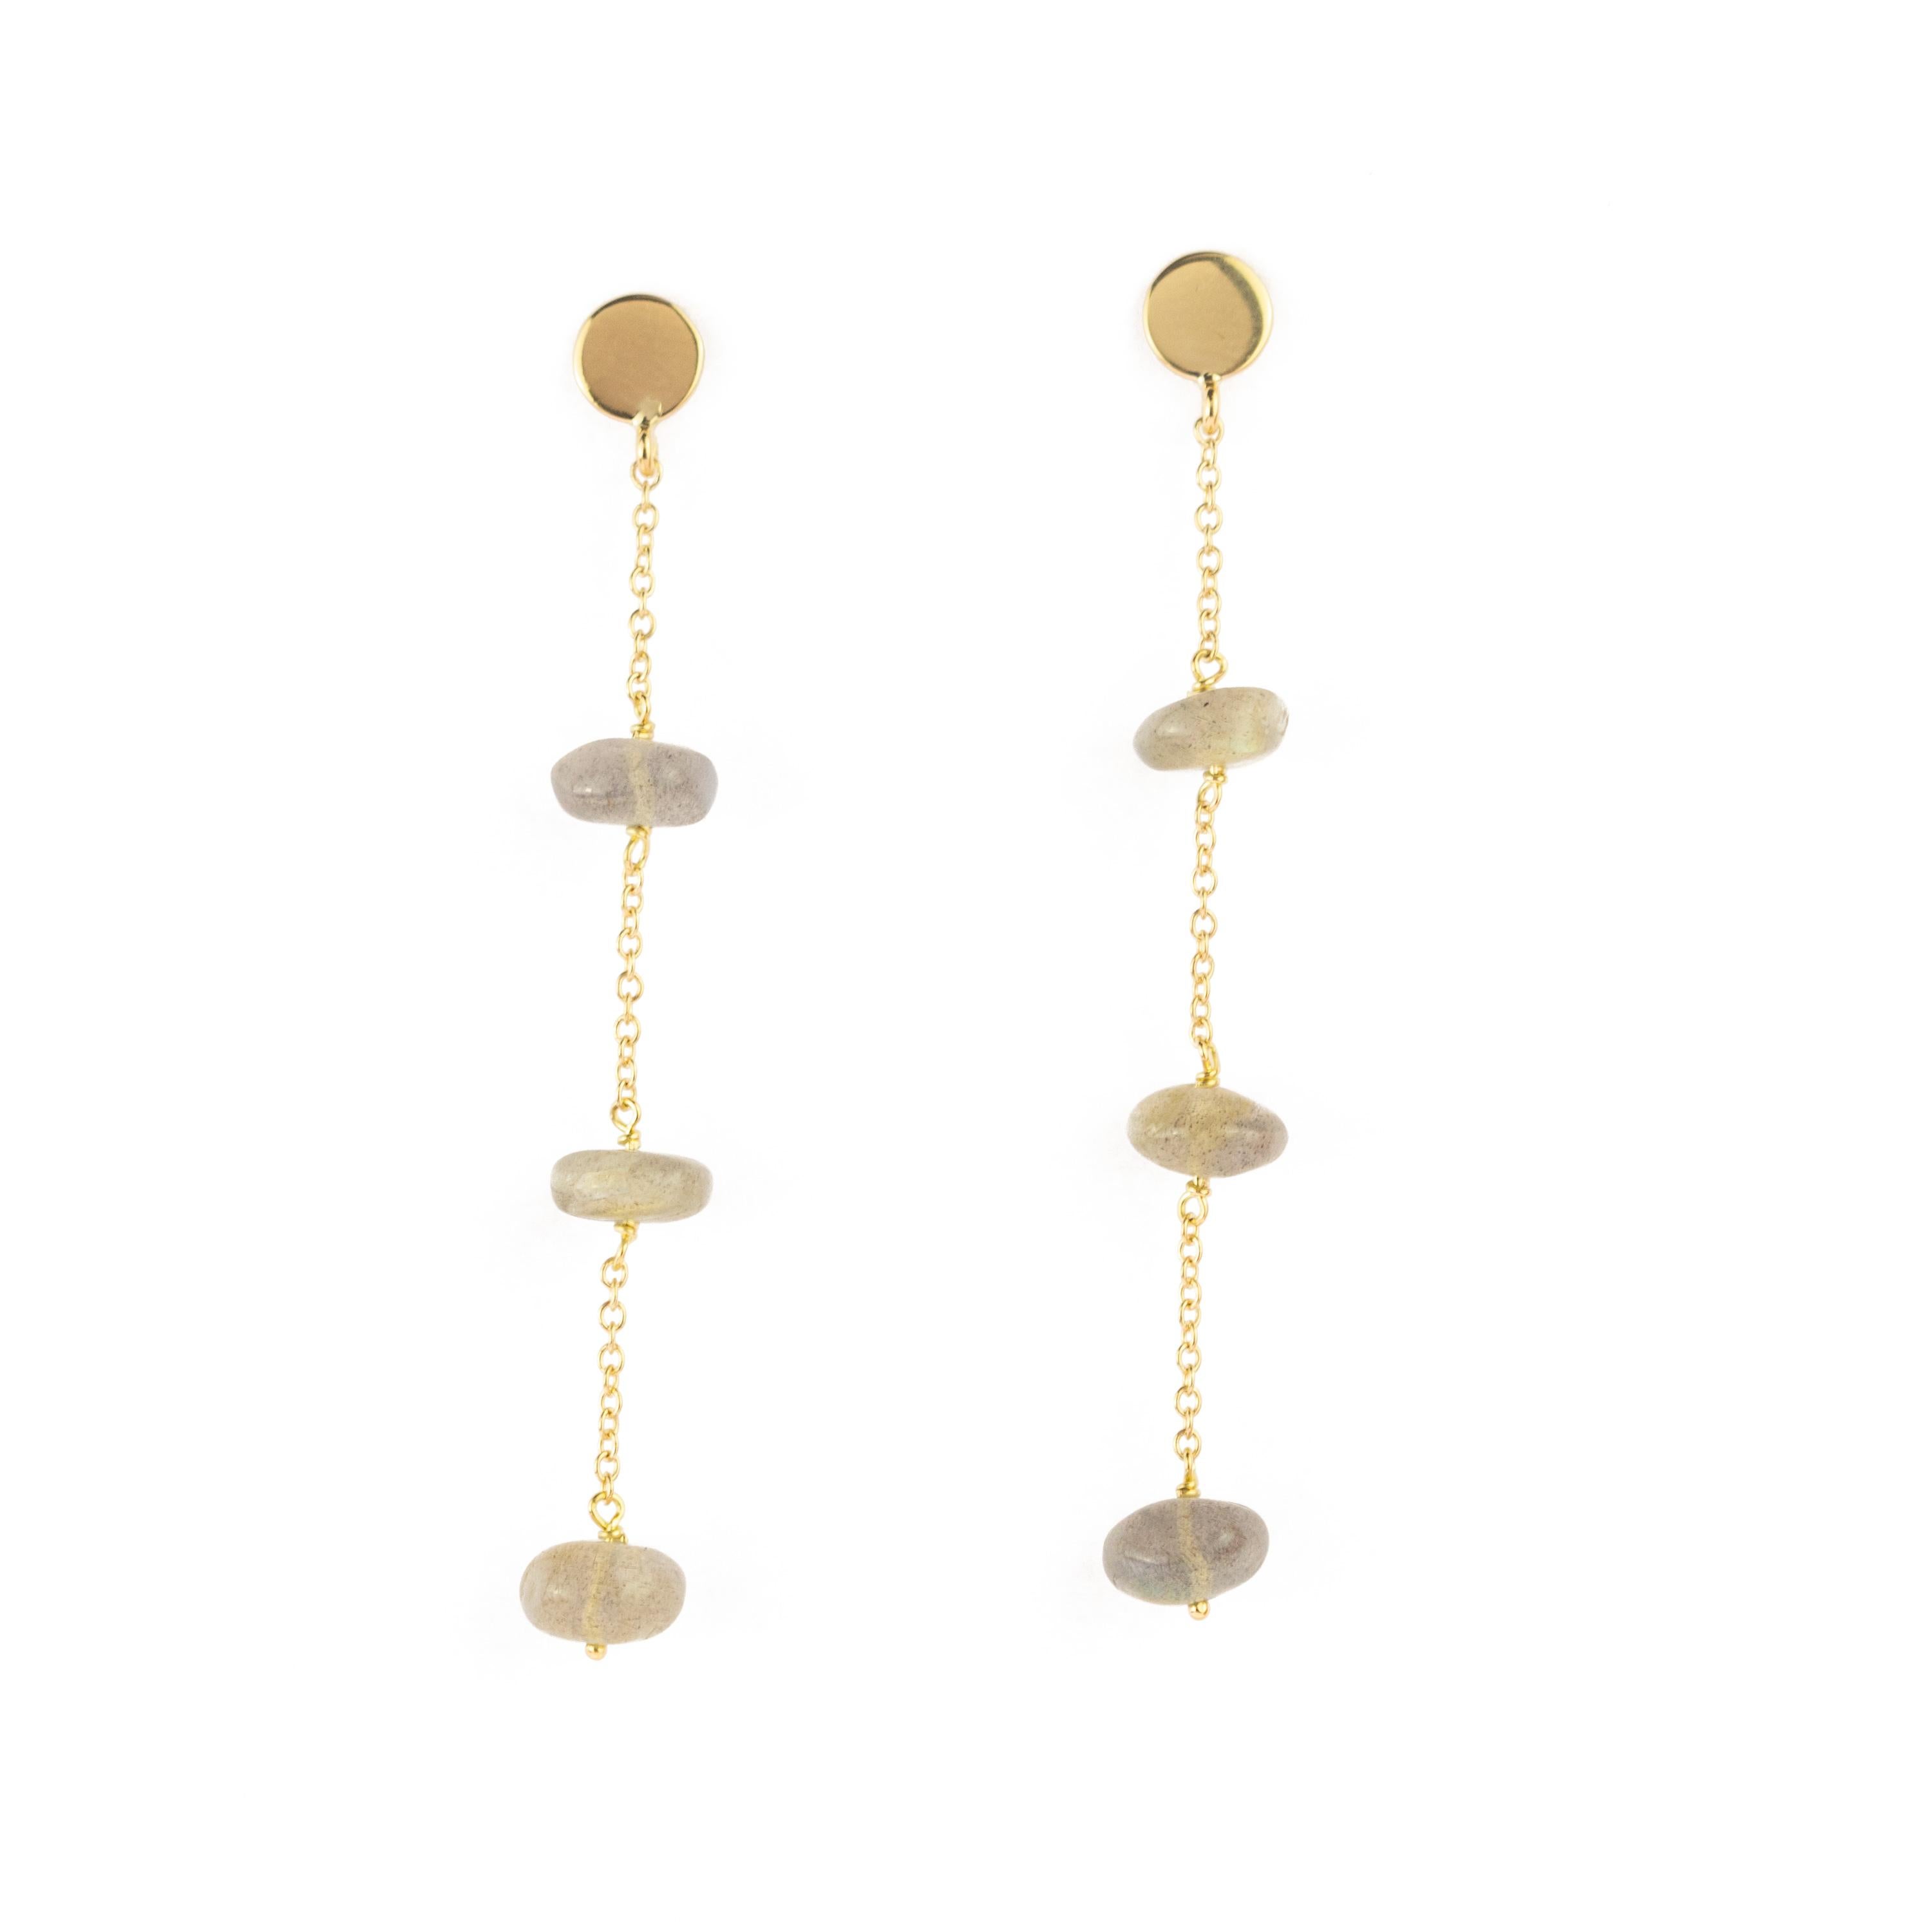 Intini Jewels signature quality on a modern and contemporary design jewel. Stunning long and dangle earrings with three Cat's Eye beads. Embellished with a 18 karat yellow gold chain will make you look beautiful and full of charm.

Cat's Eye Stone